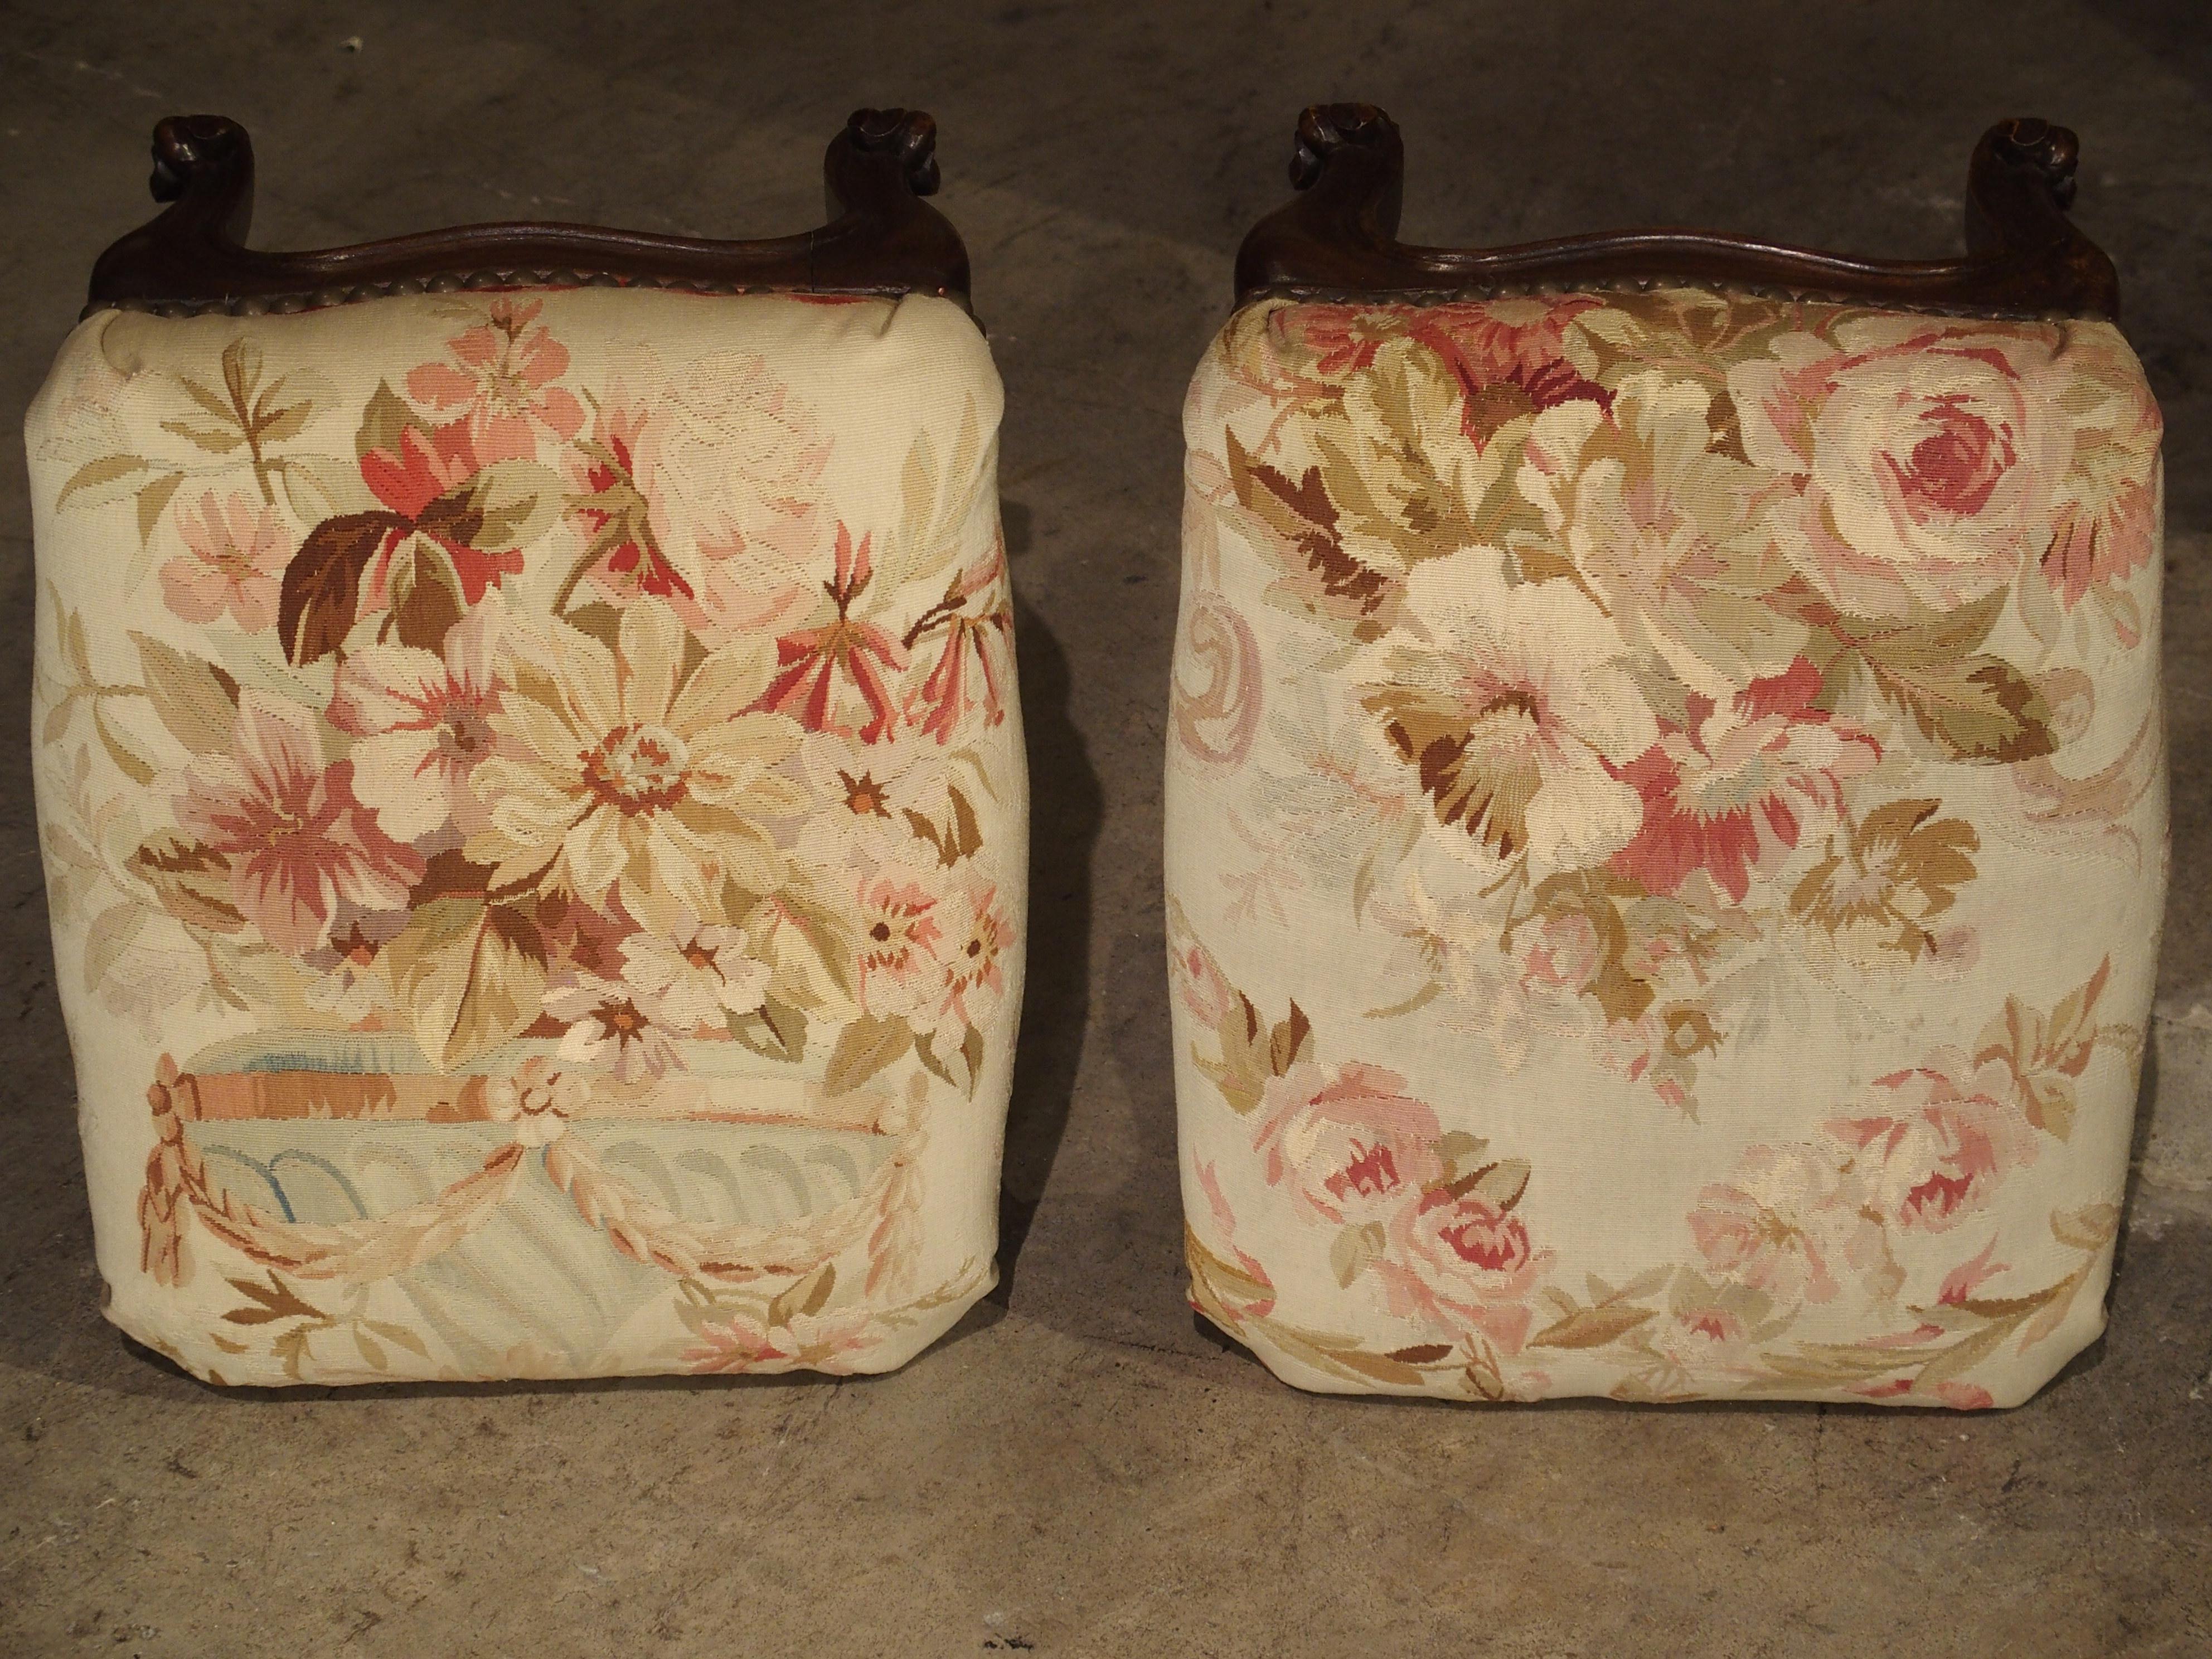 From France, this beautiful pair of Louis XV Style footstools have been upholstered in antique flat-woven Aubusson. This type of Aubusson fabric was primarily used for very large chateau room size rugs as well as custom upholstery. The silk and wool